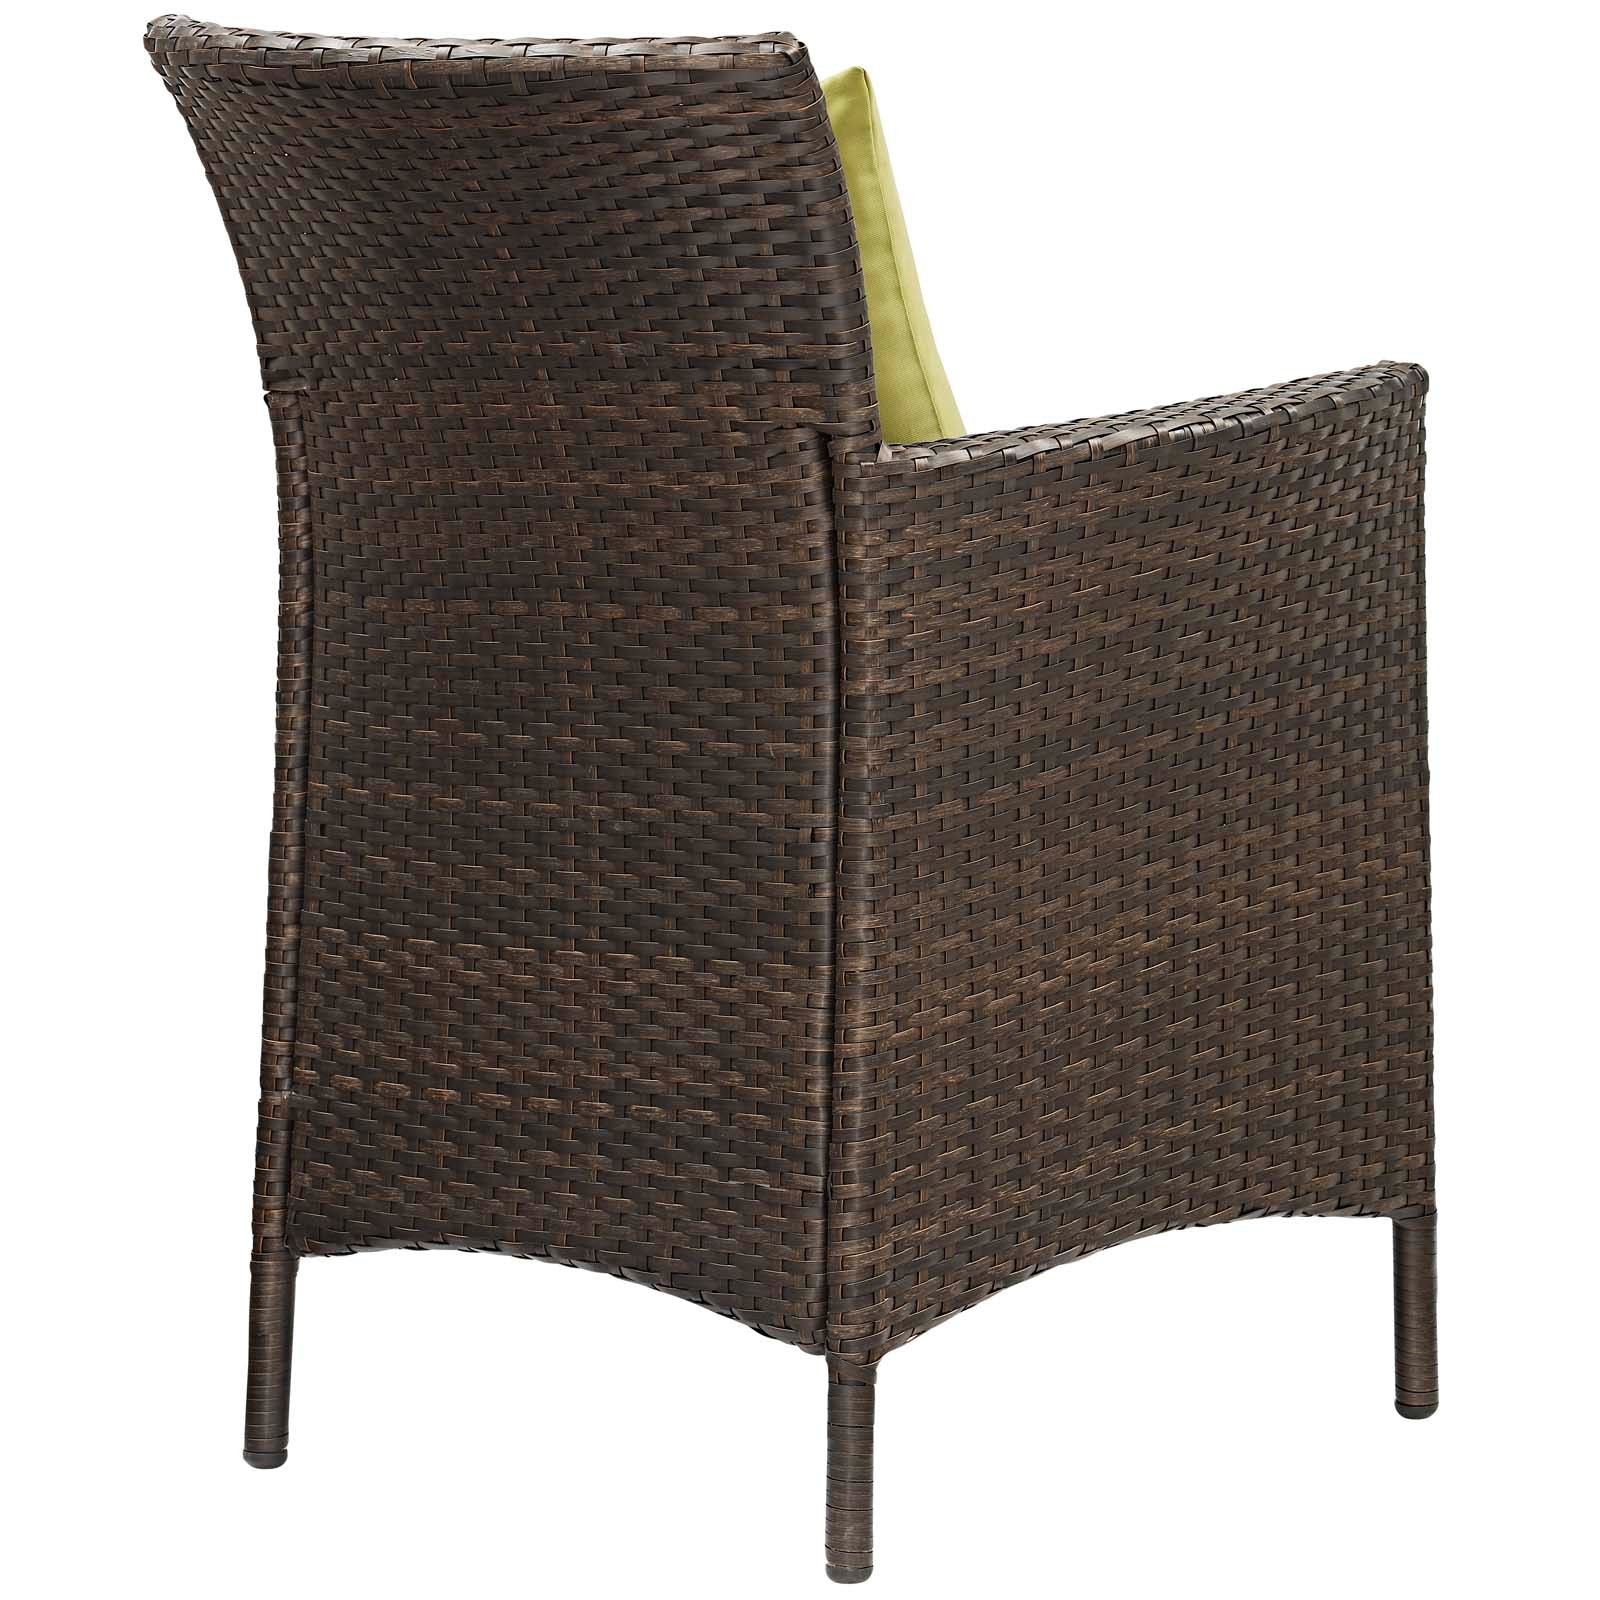 Modway Outdoor Dining Chairs - Conduit Outdoor Patio Wicker Rattan Dining Armchair Set of 4 Brown Peridot